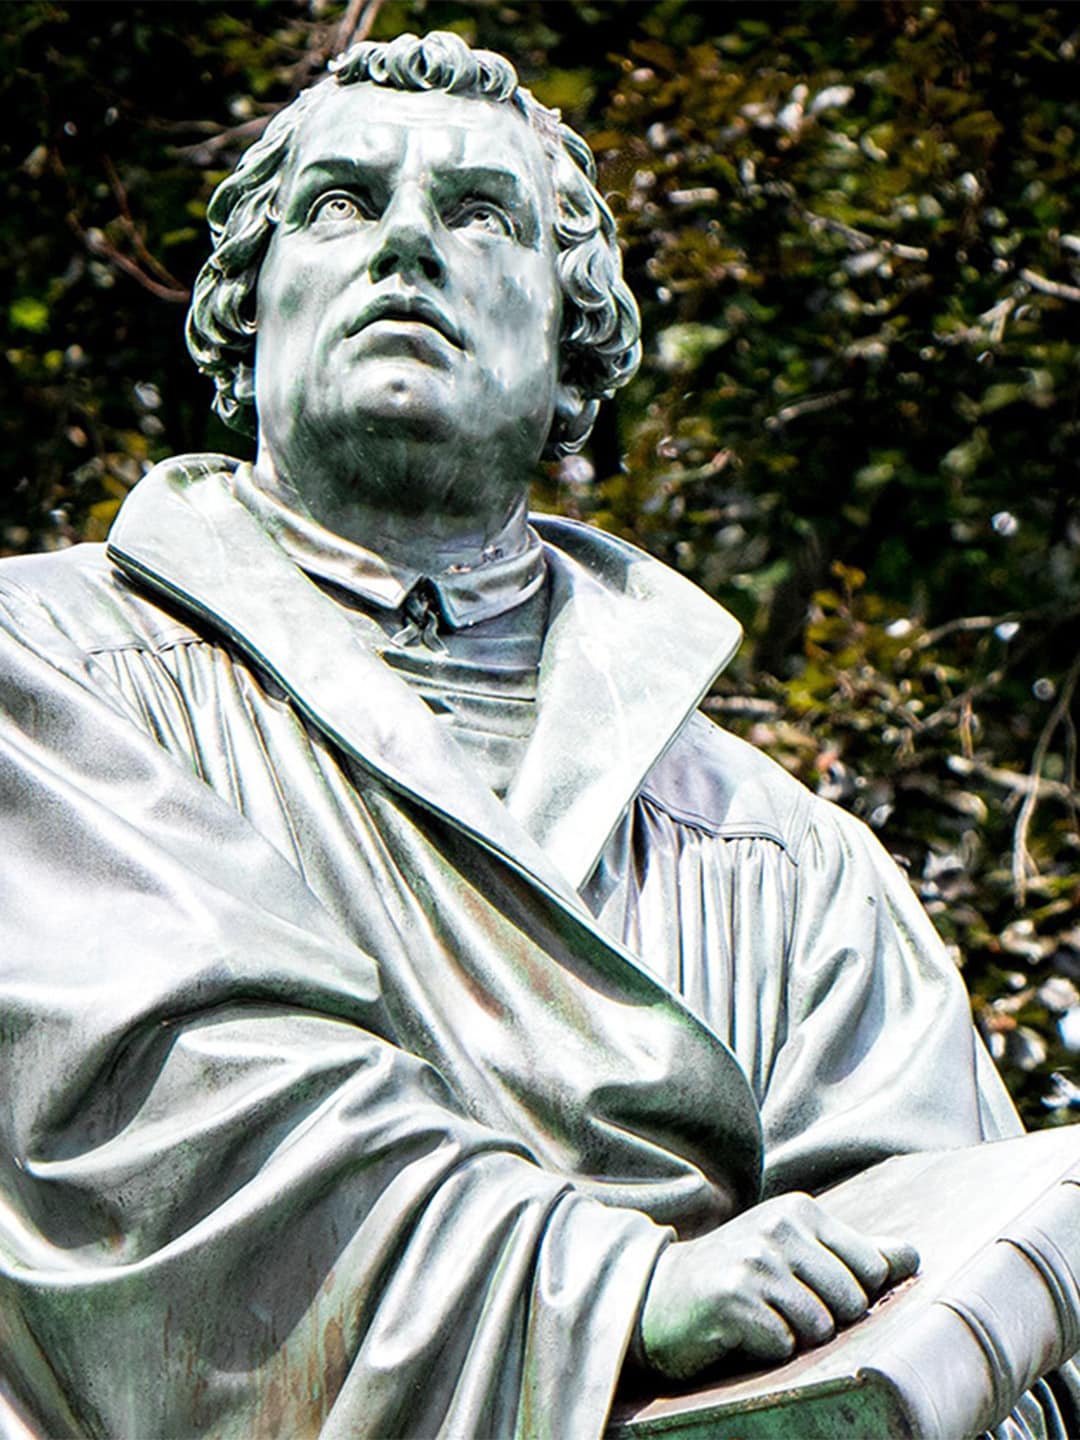 martin luther statue